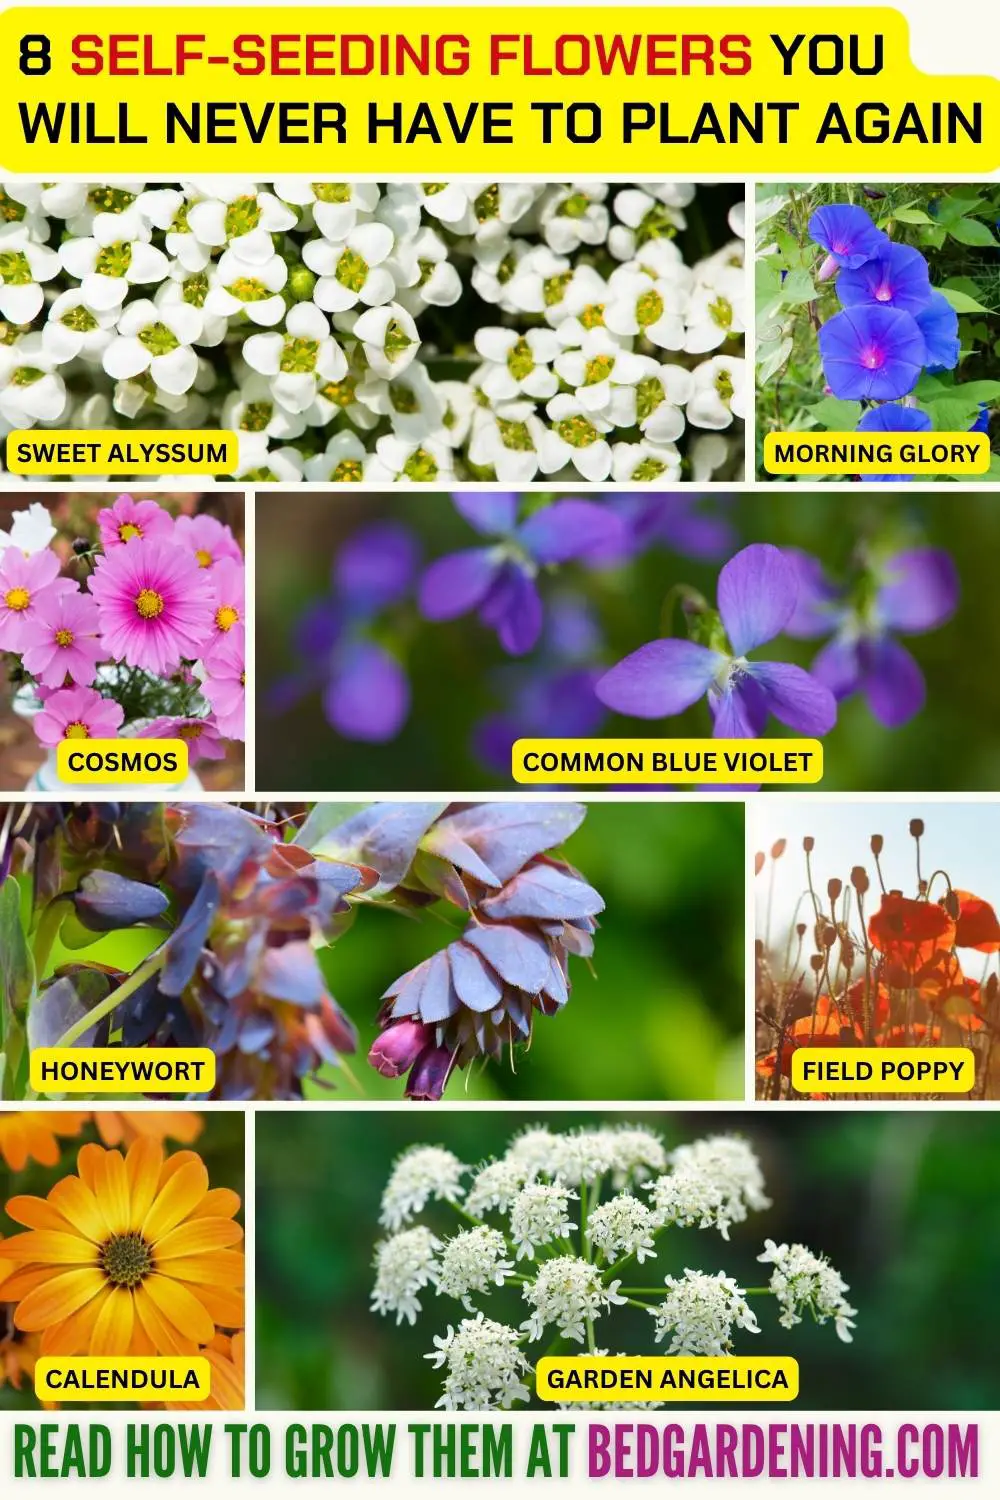 8 Self-Seeding Flowers You Will Never Have To Plant Again